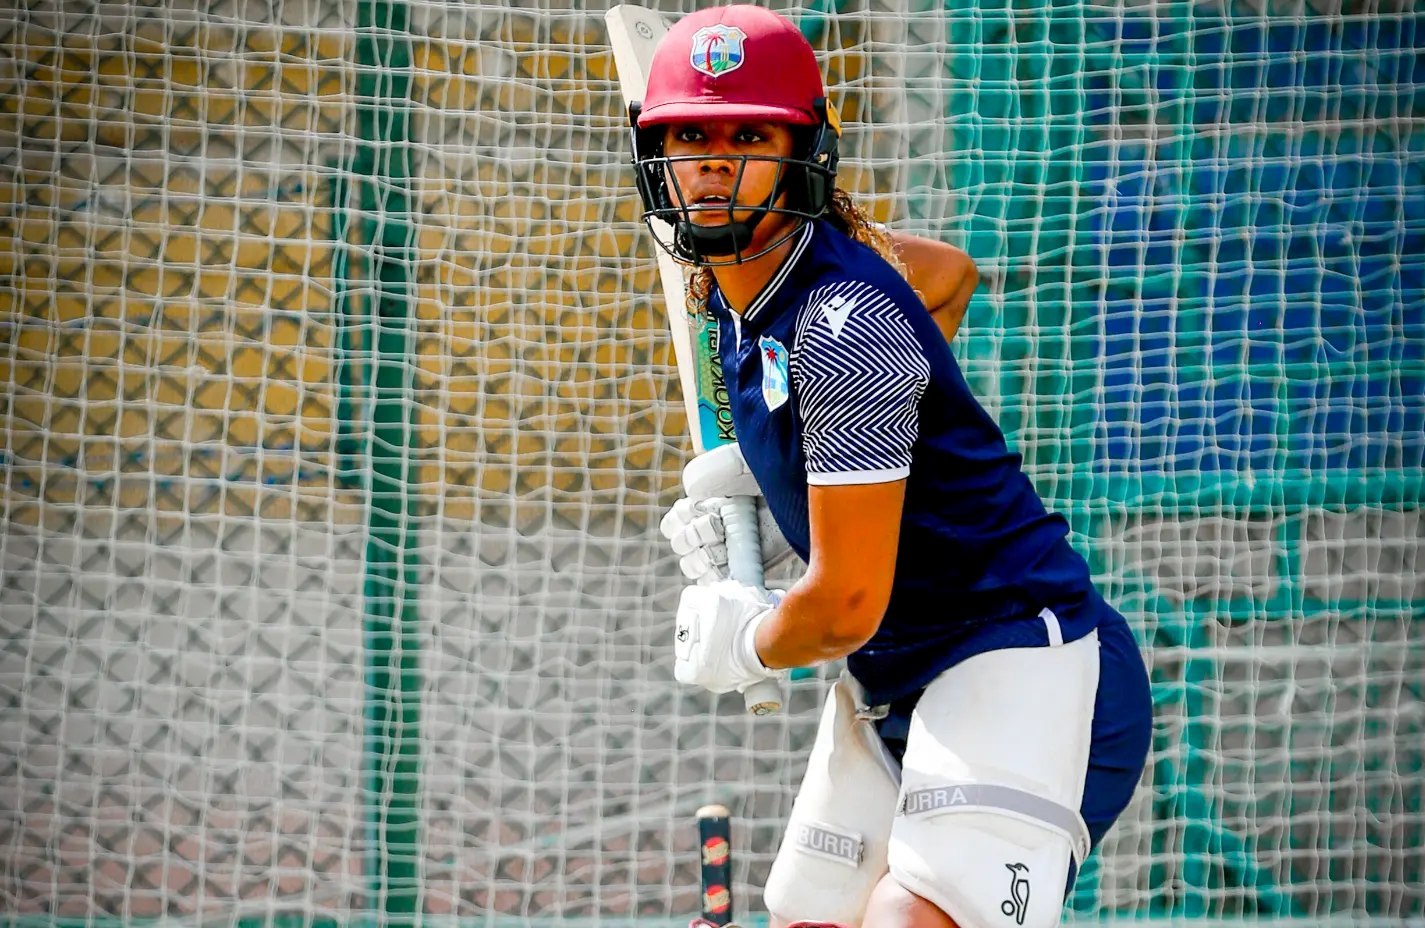 West Indies captain Hayley Matthews bats in the nets in Karachi during a training session. (Photo credit - CWI Media)